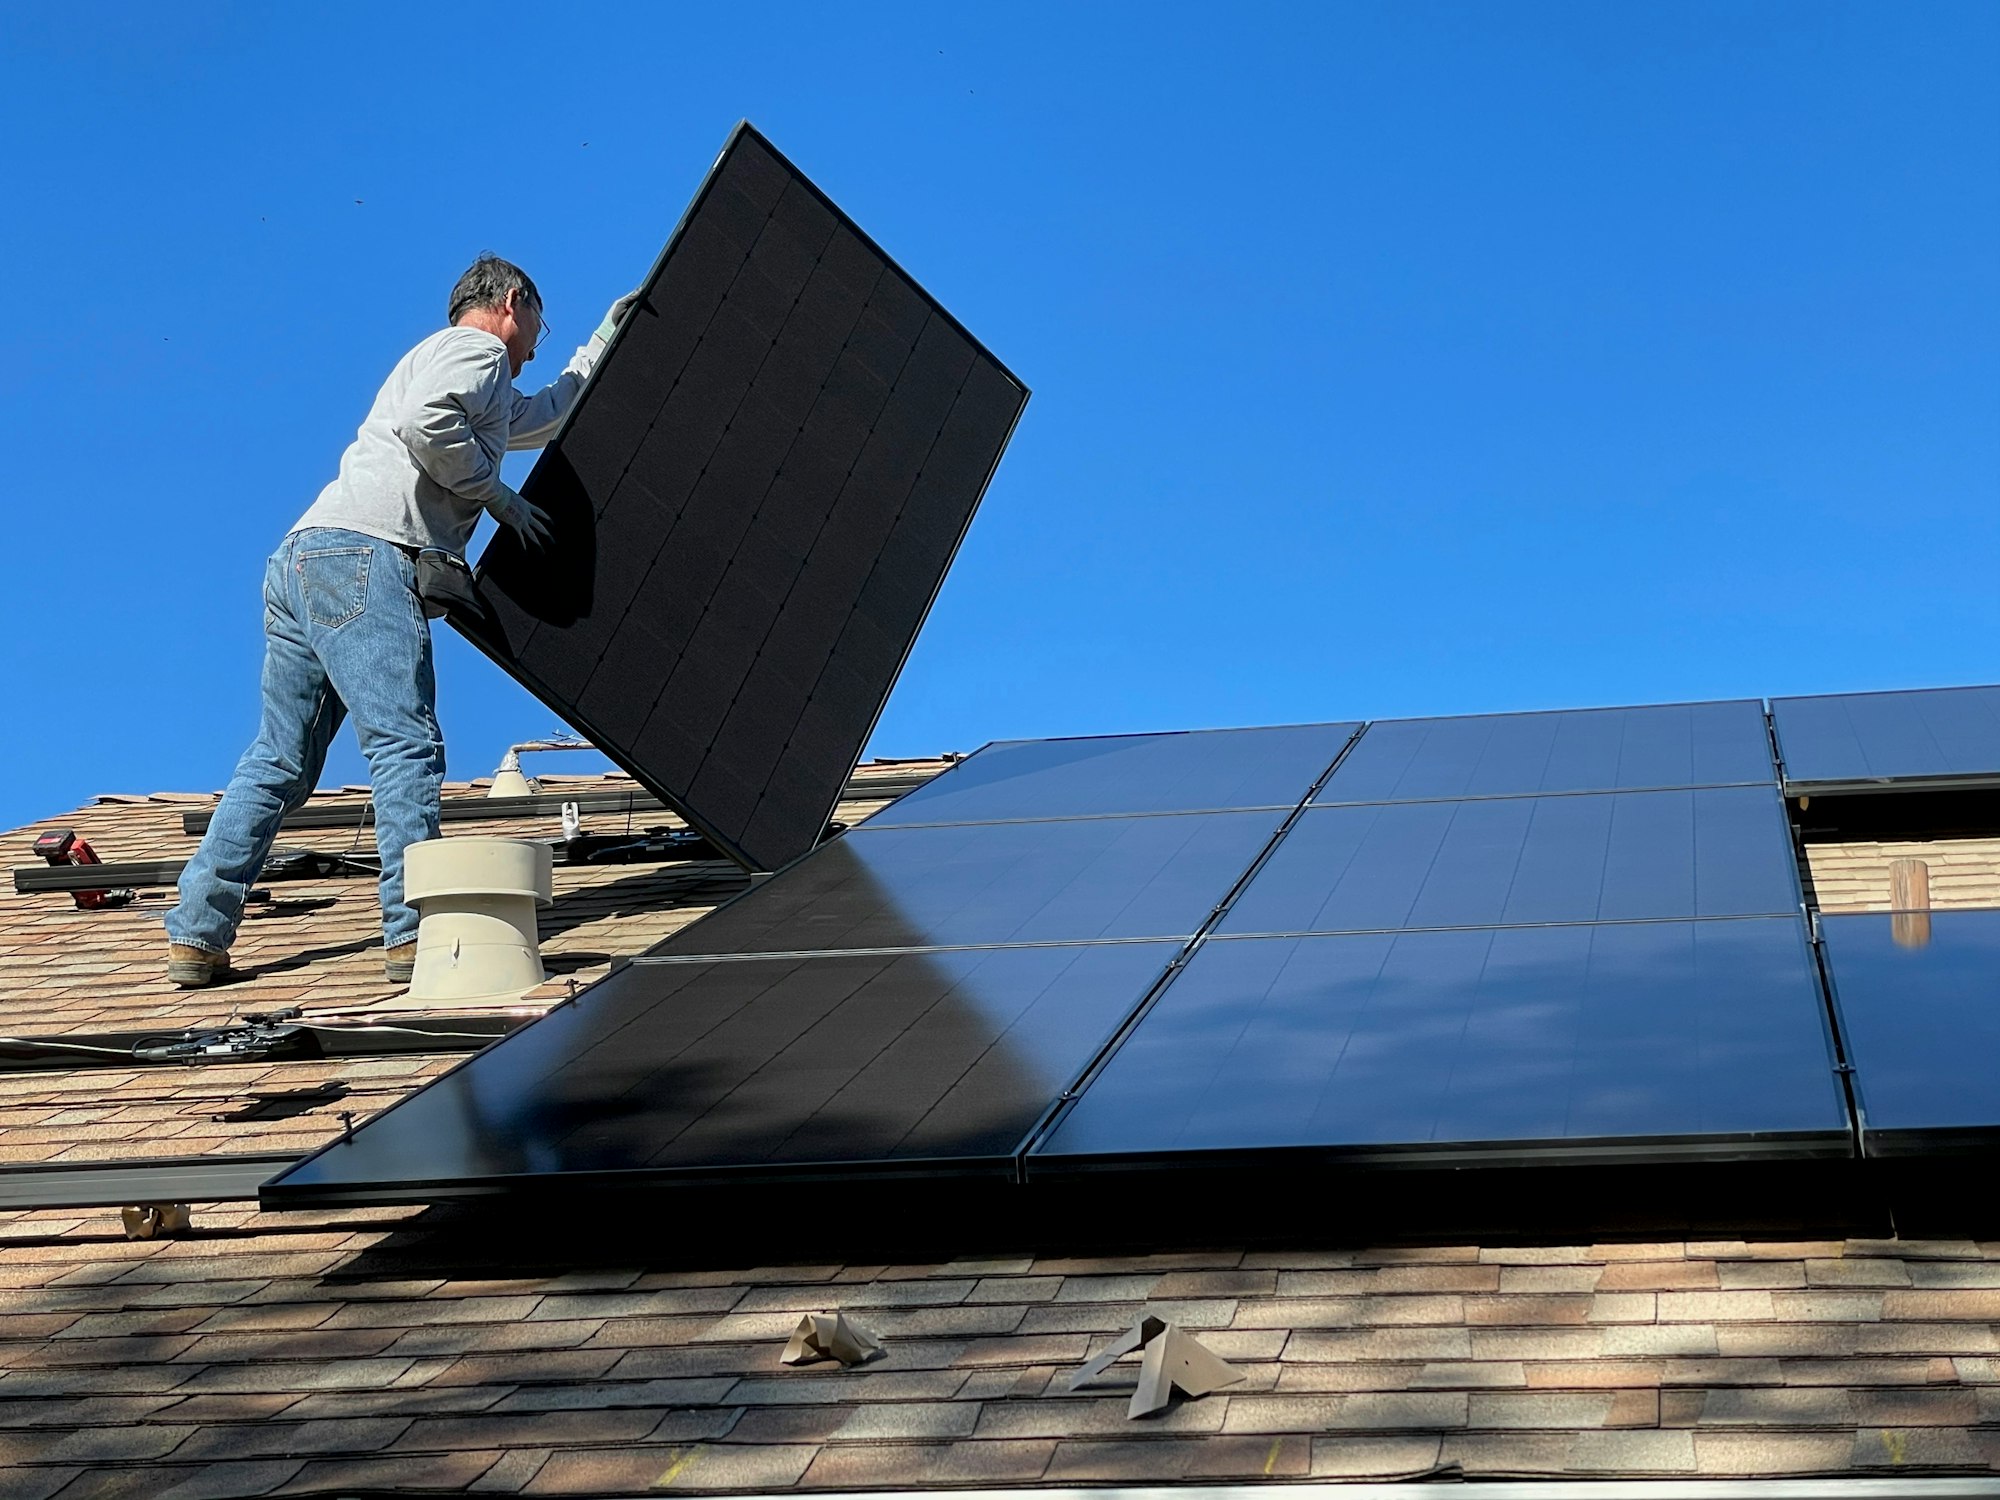 A retrospective on getting solar panels installed